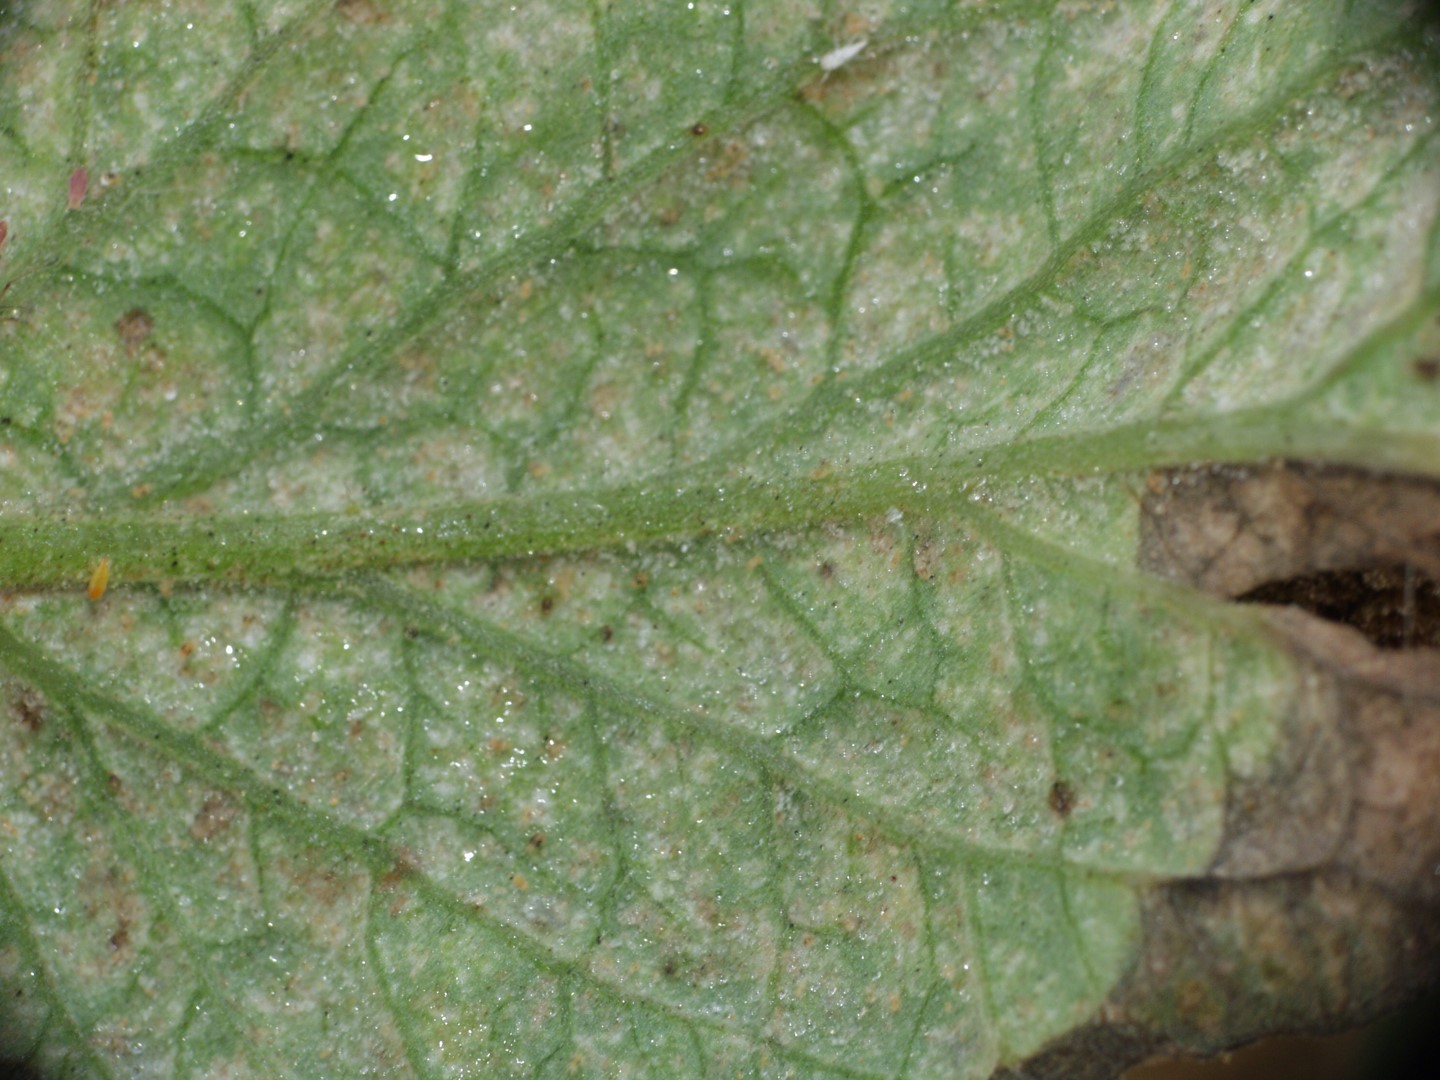 Two-spotted spider mite damage to melon leaf.